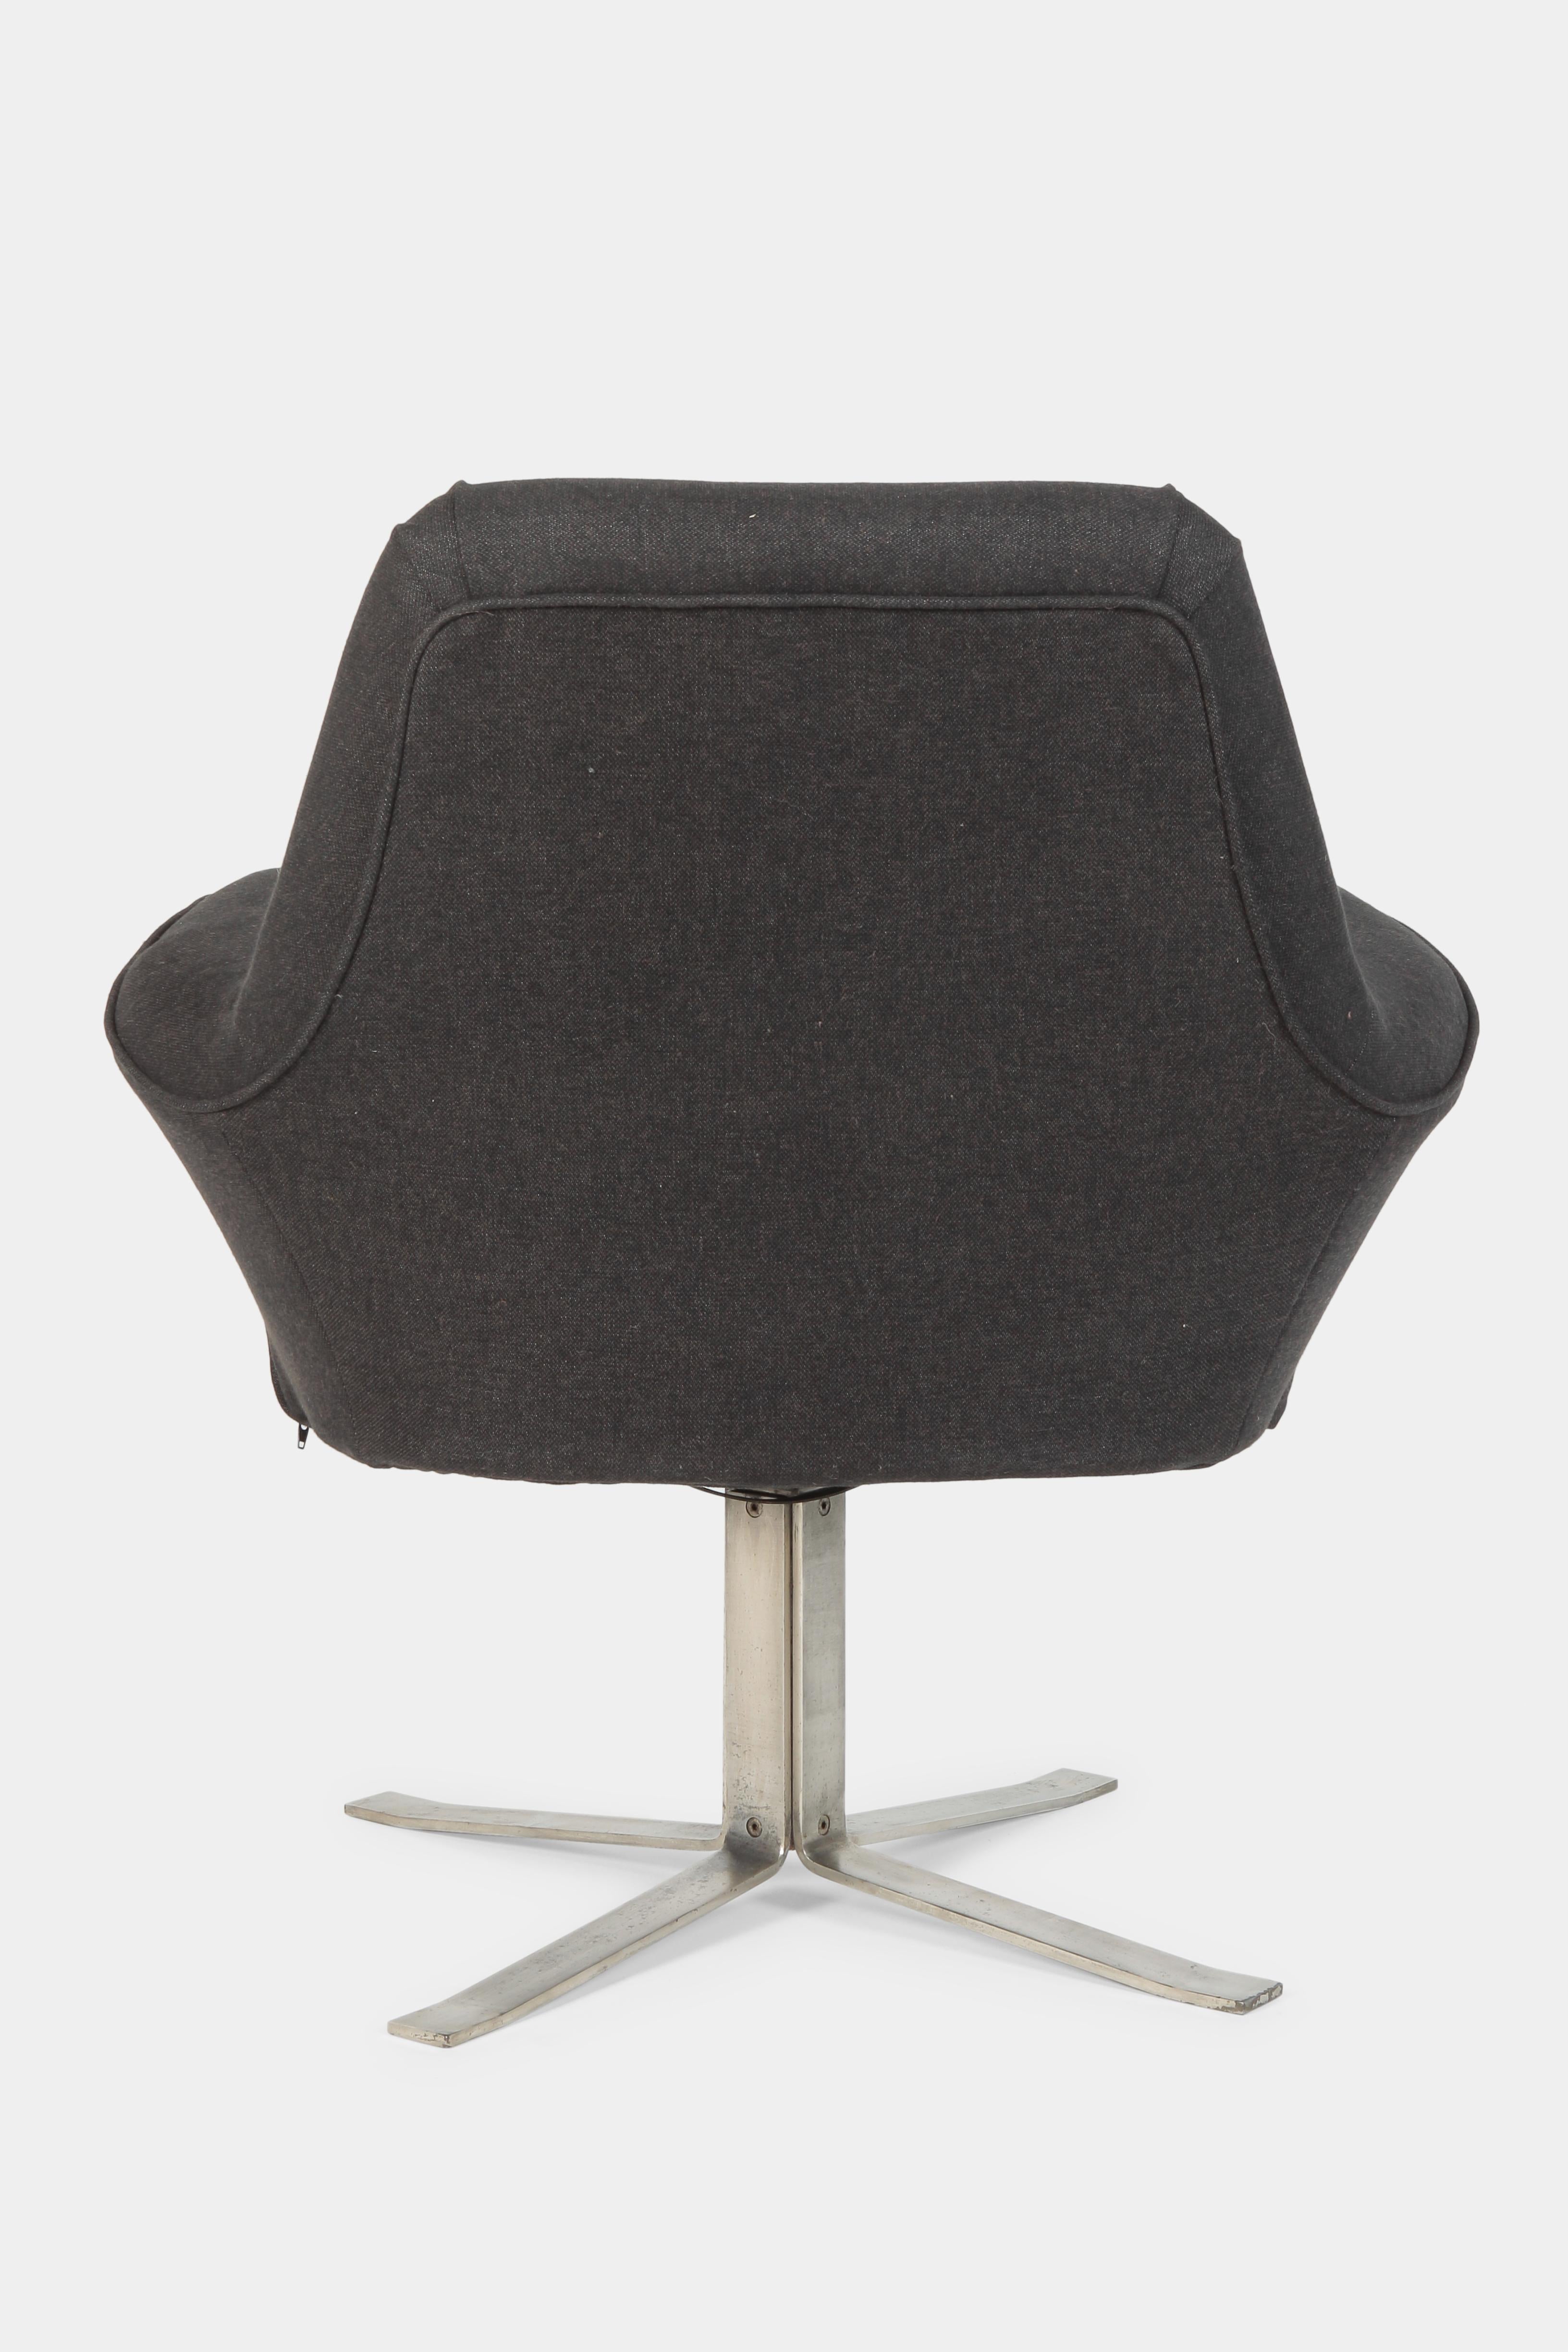 Giulio Moscatelli “Dolly” Lounge Chair Forma Nova, 1960s In Good Condition For Sale In Basel, CH